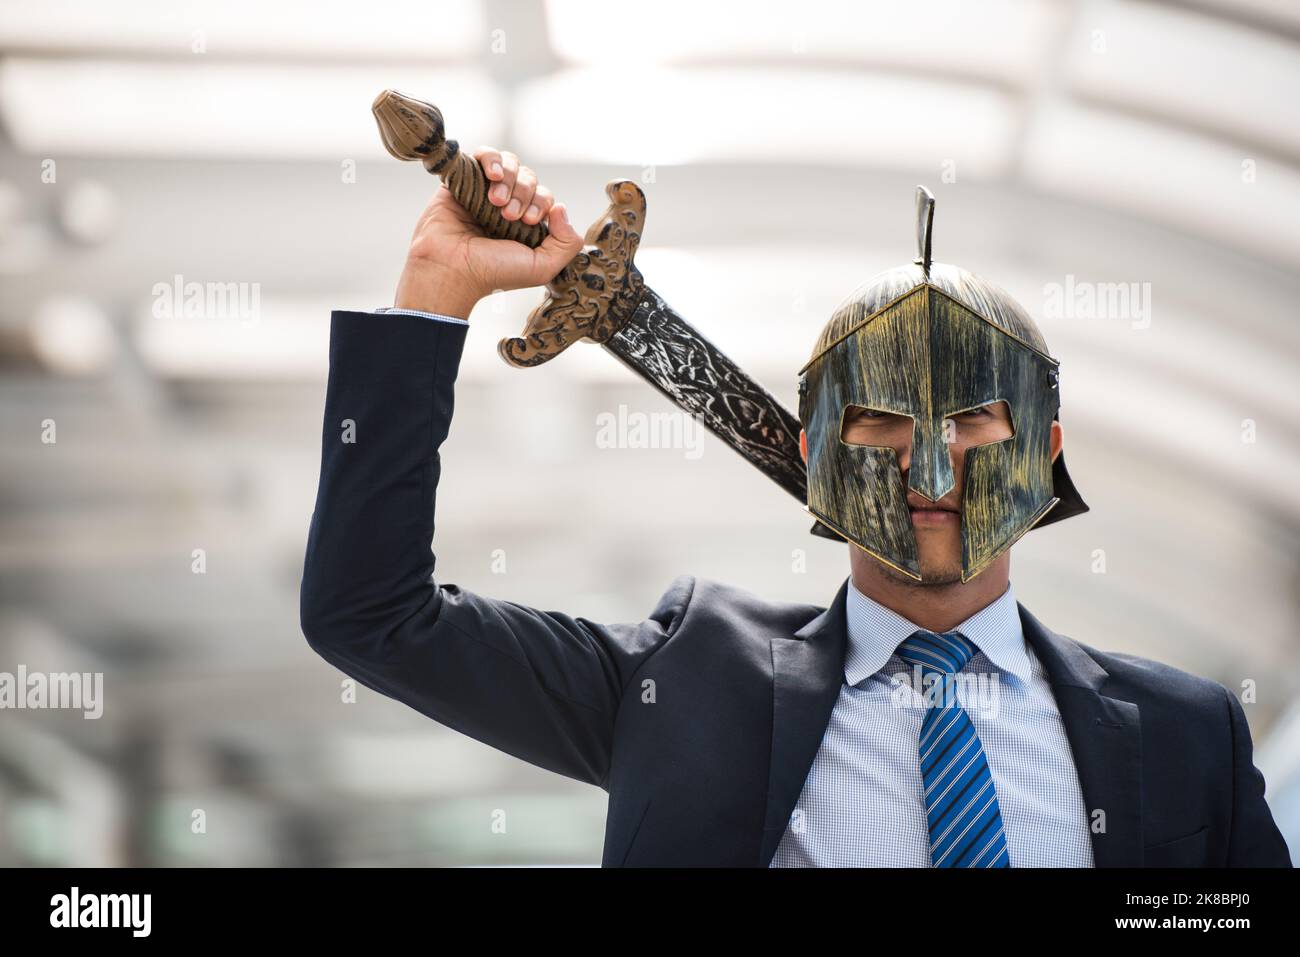 2023 New Year, Business Warrior, Business Man holding sword and shield get ready to fighting in business war. Stock Photo